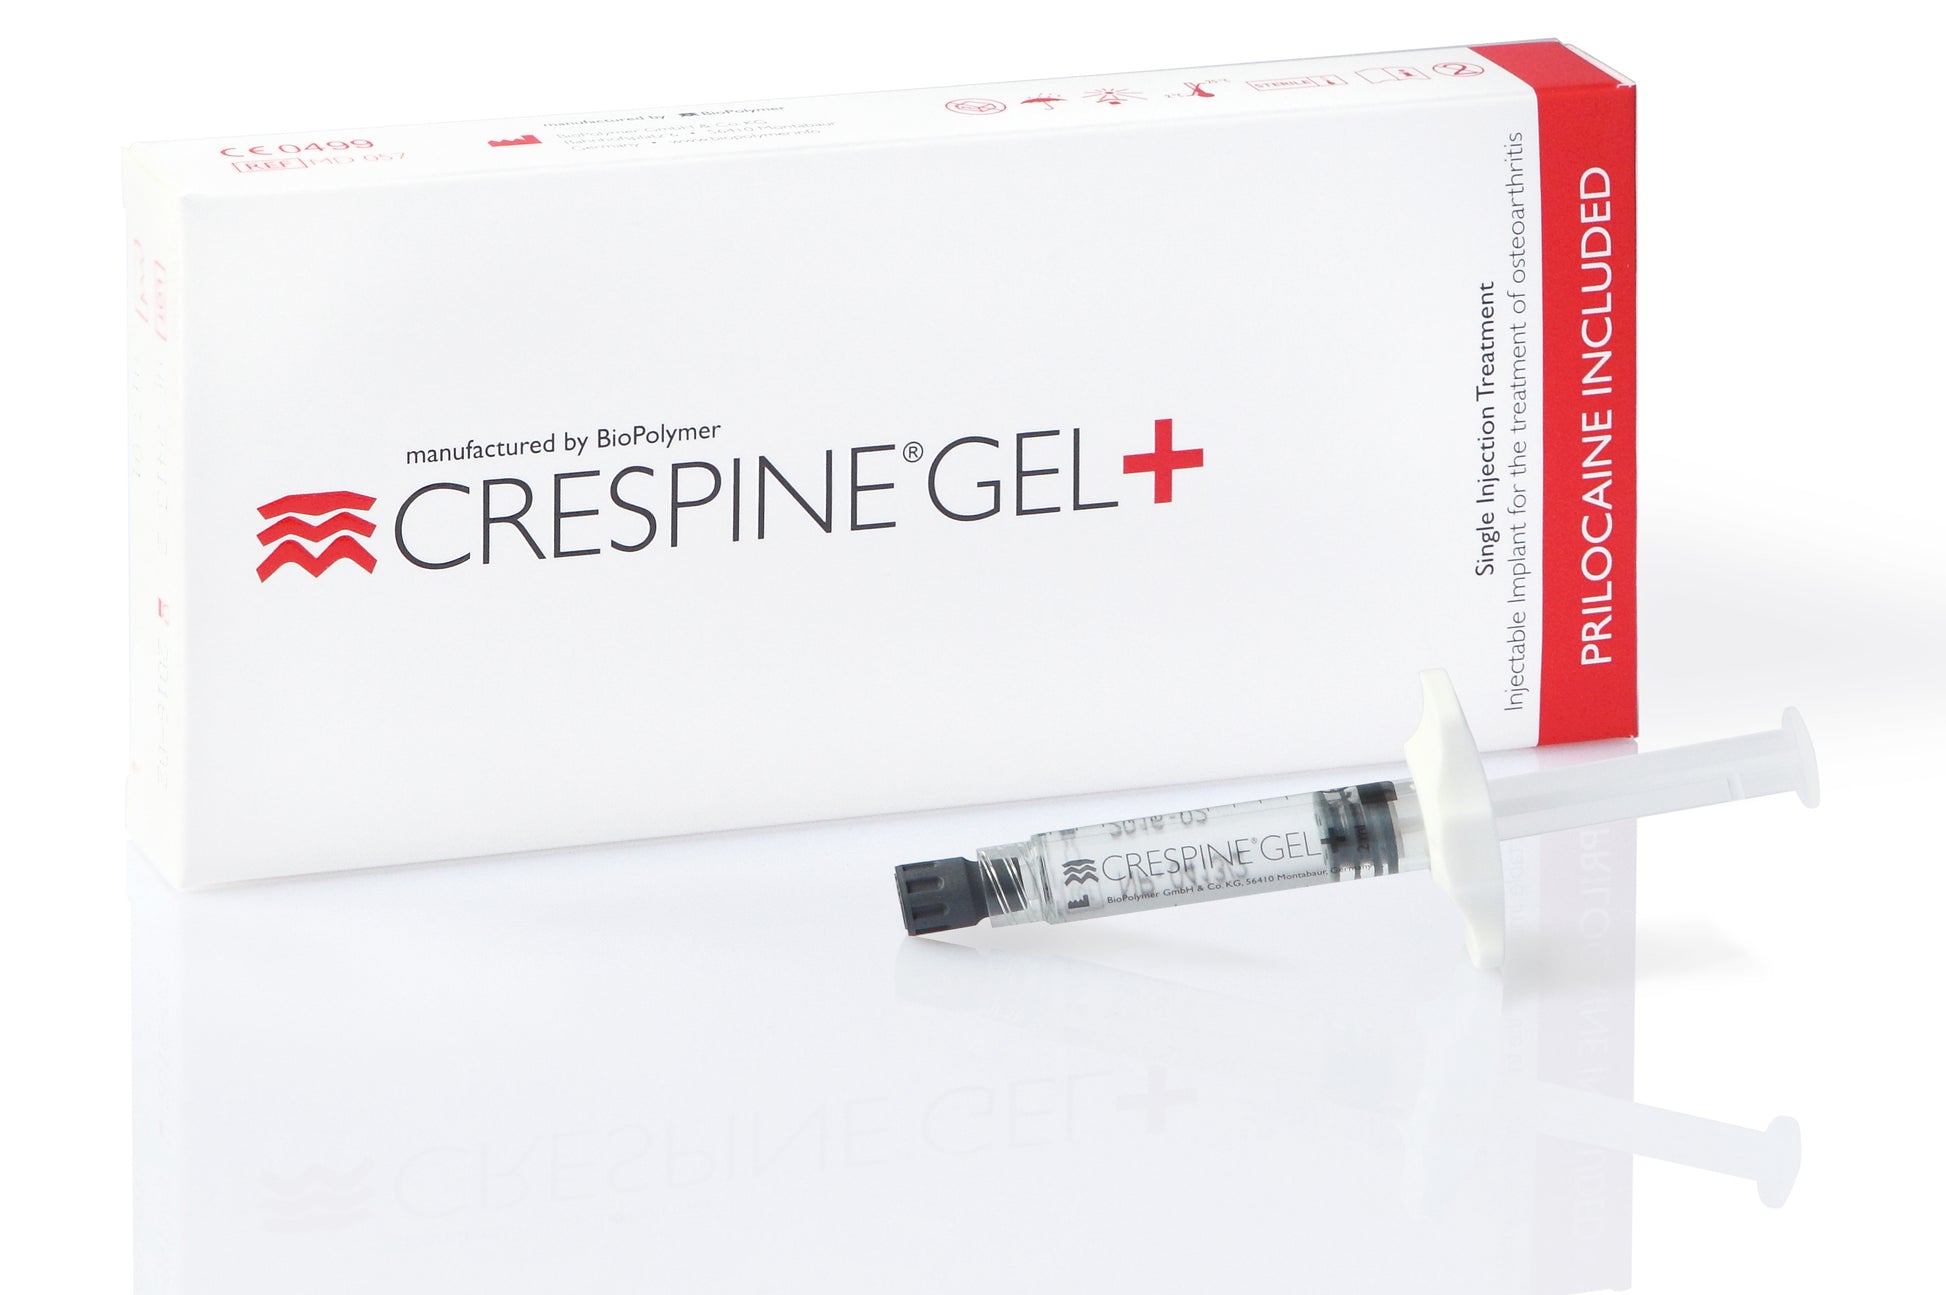 Crespine Gel Plus with injection, front view